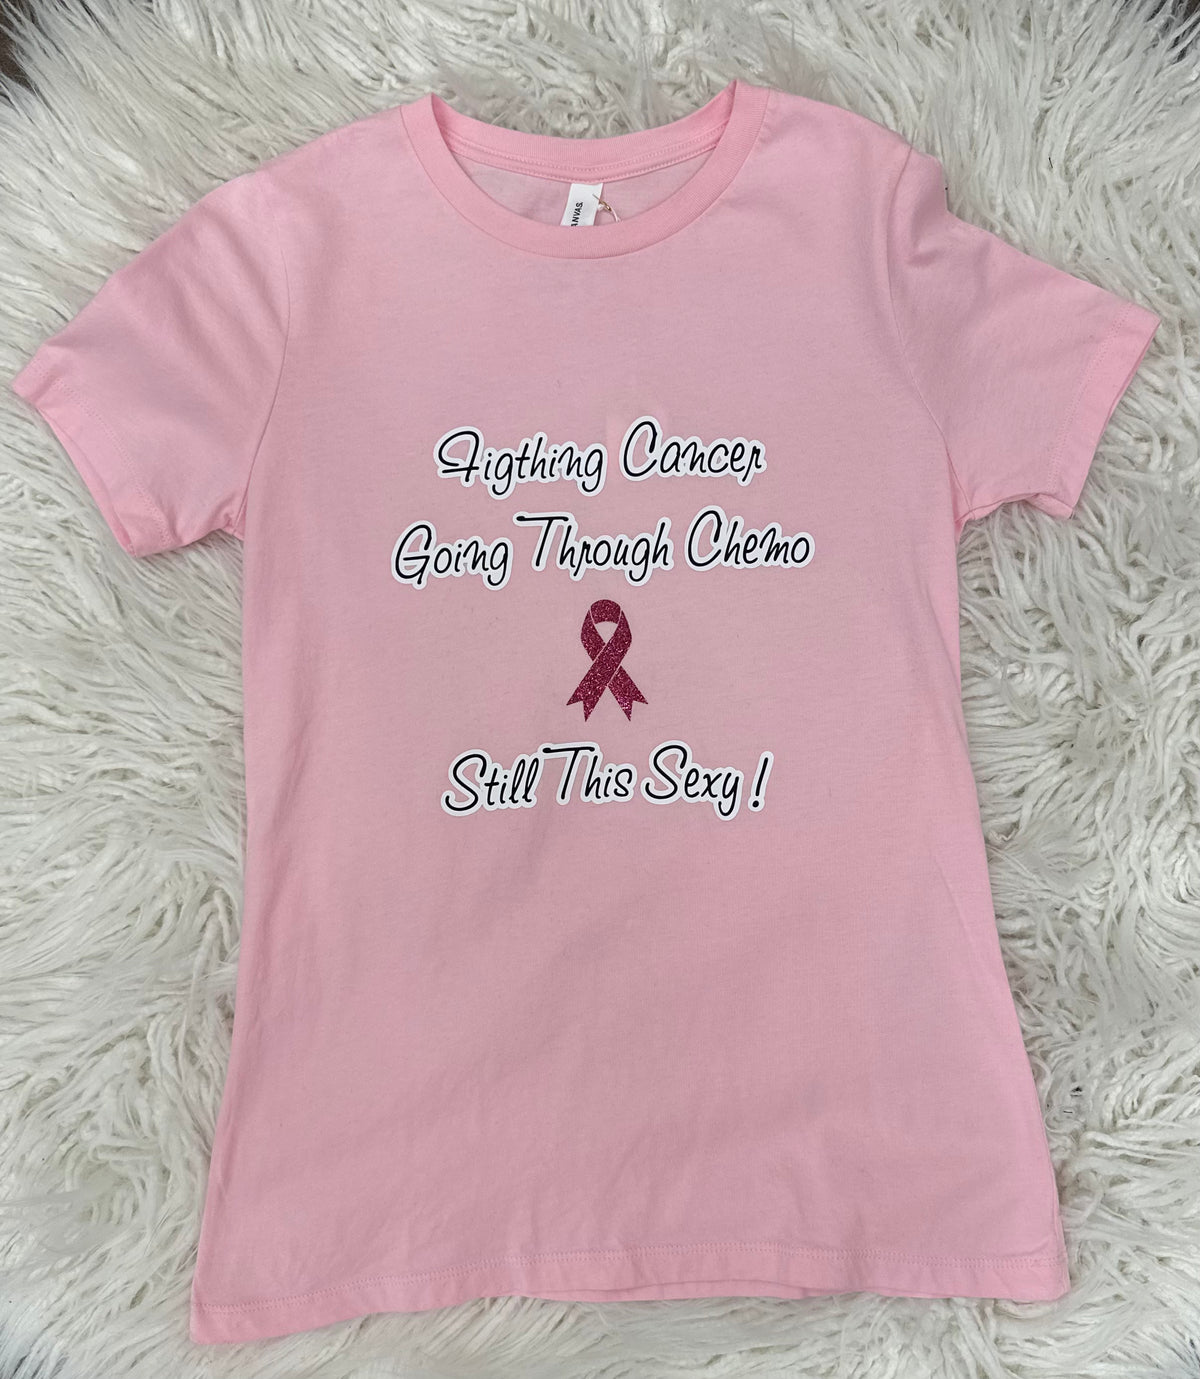 "Fighting Cancer, Going through Chemo, Still this Sexy" Breast Cancer Tee